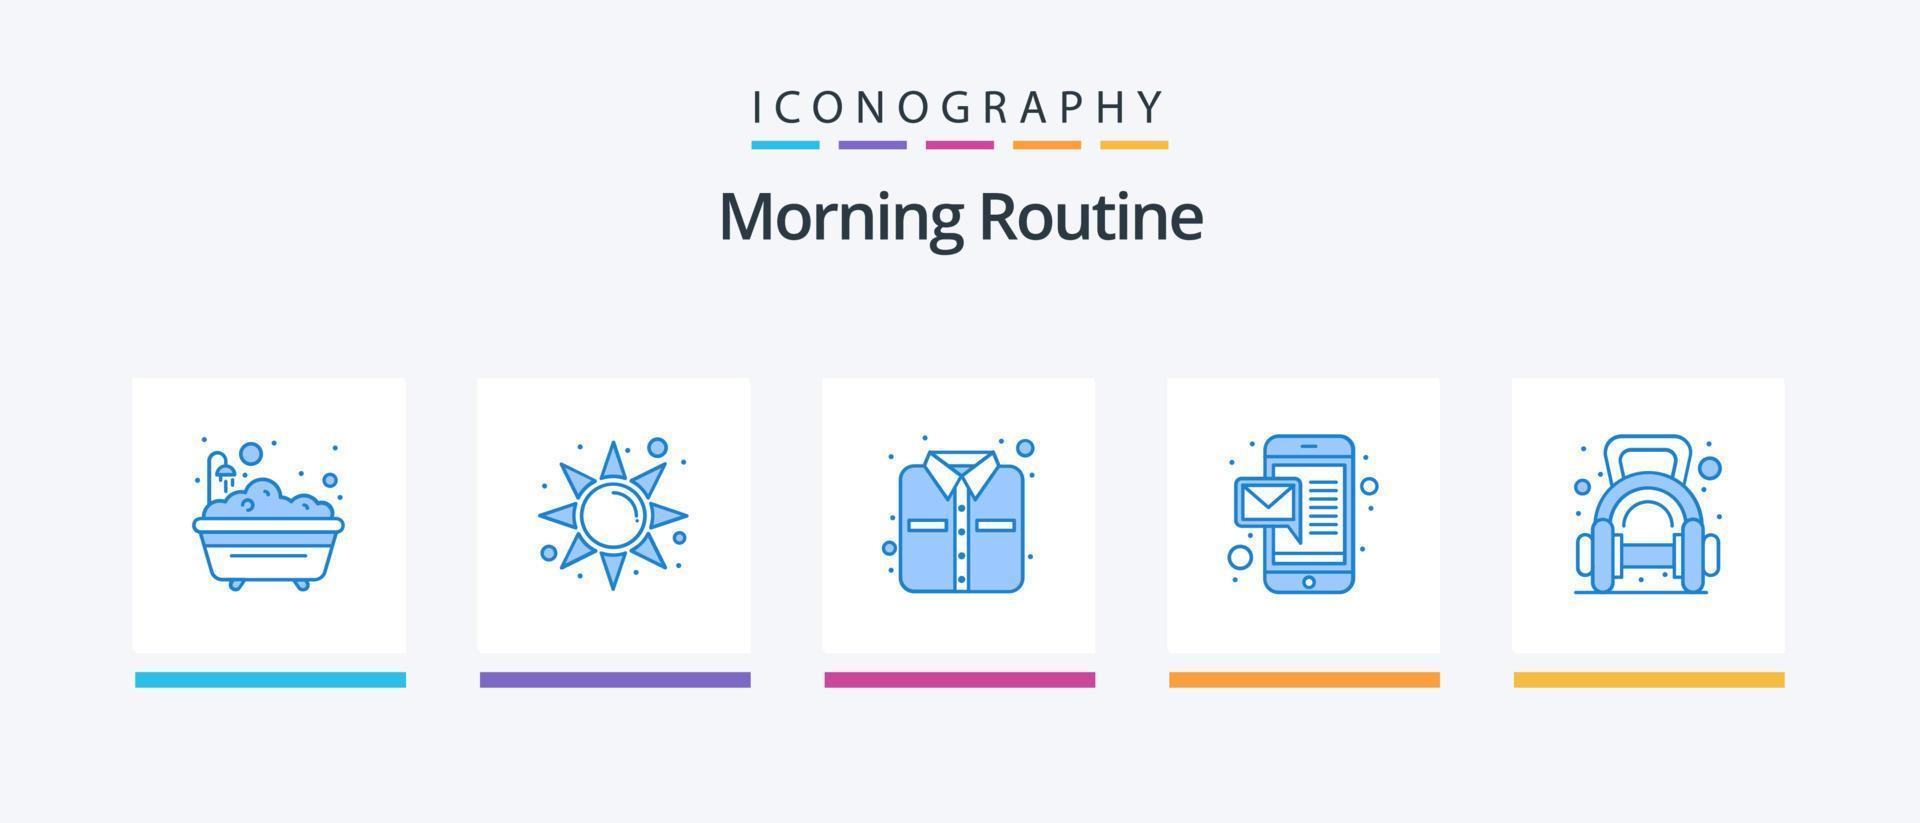 Morning Routine Blue 5 Icon Pack Including gym. weight. shirt. fitness. mobile. Creative Icons Design vector